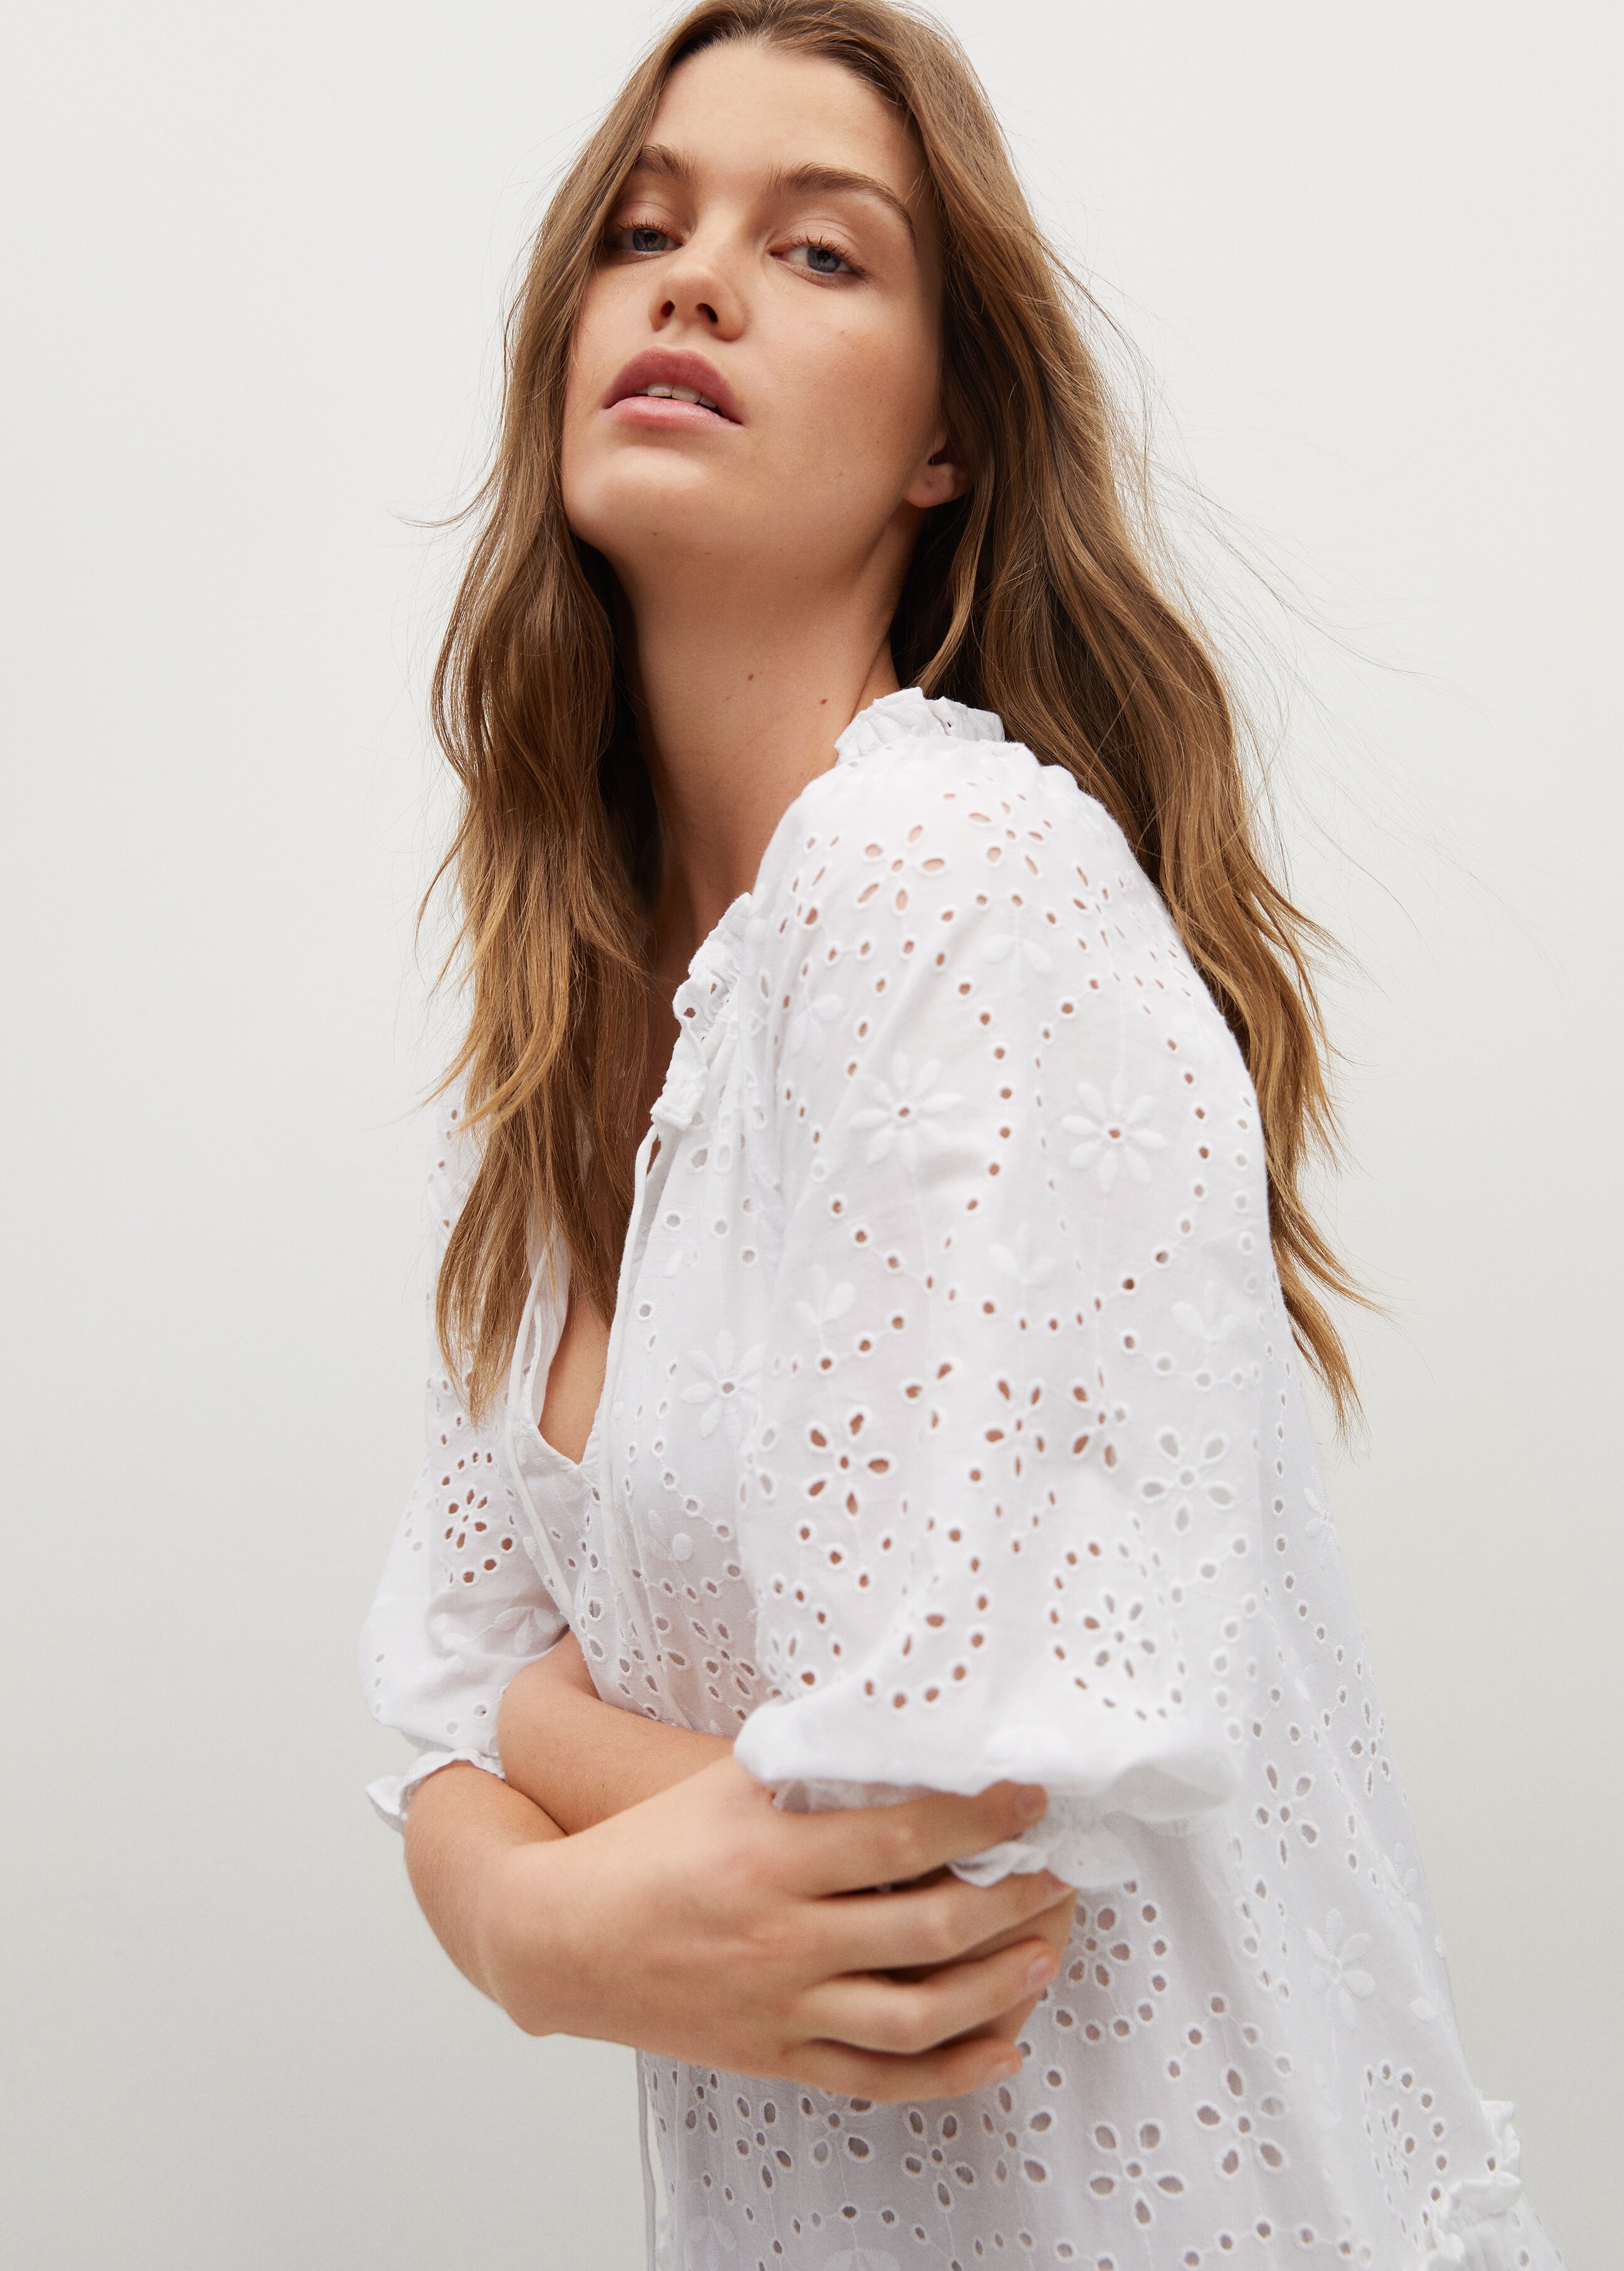 Broderie anglaise cotton dress - Details of the article 1